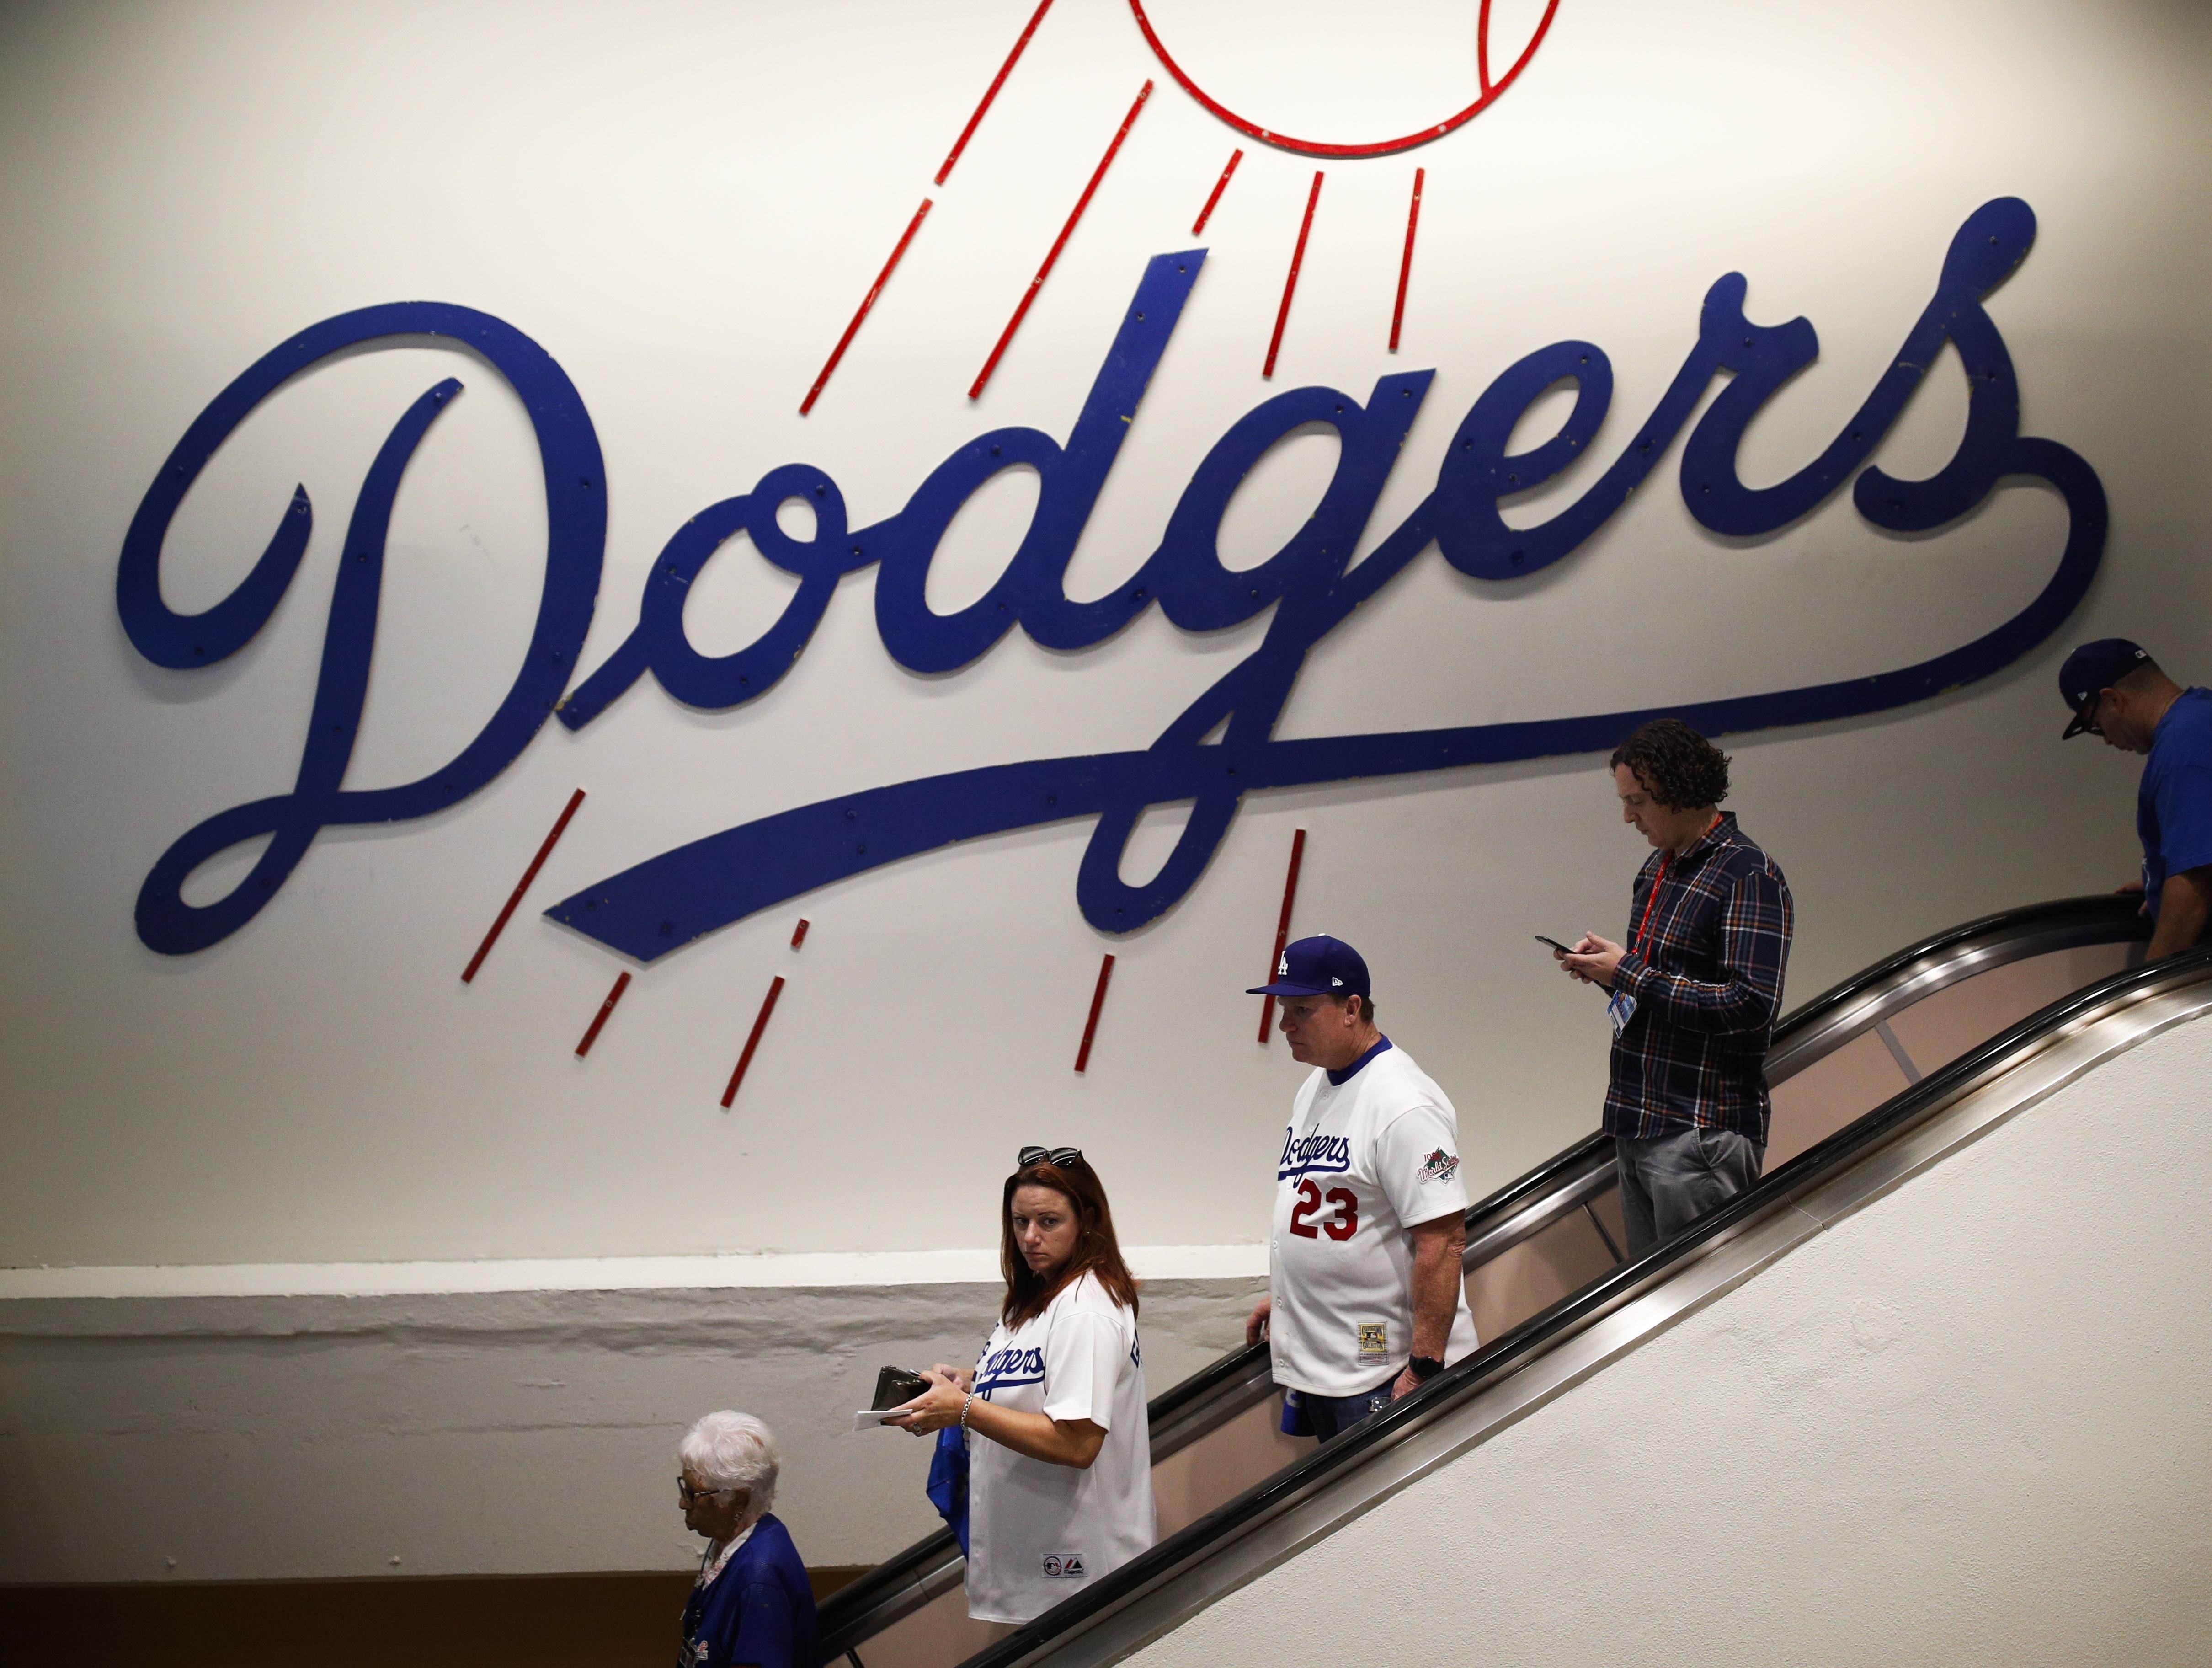 L.A. Dodgers pull Pride night invite for prominent LGBTQ group, prompting  backlash